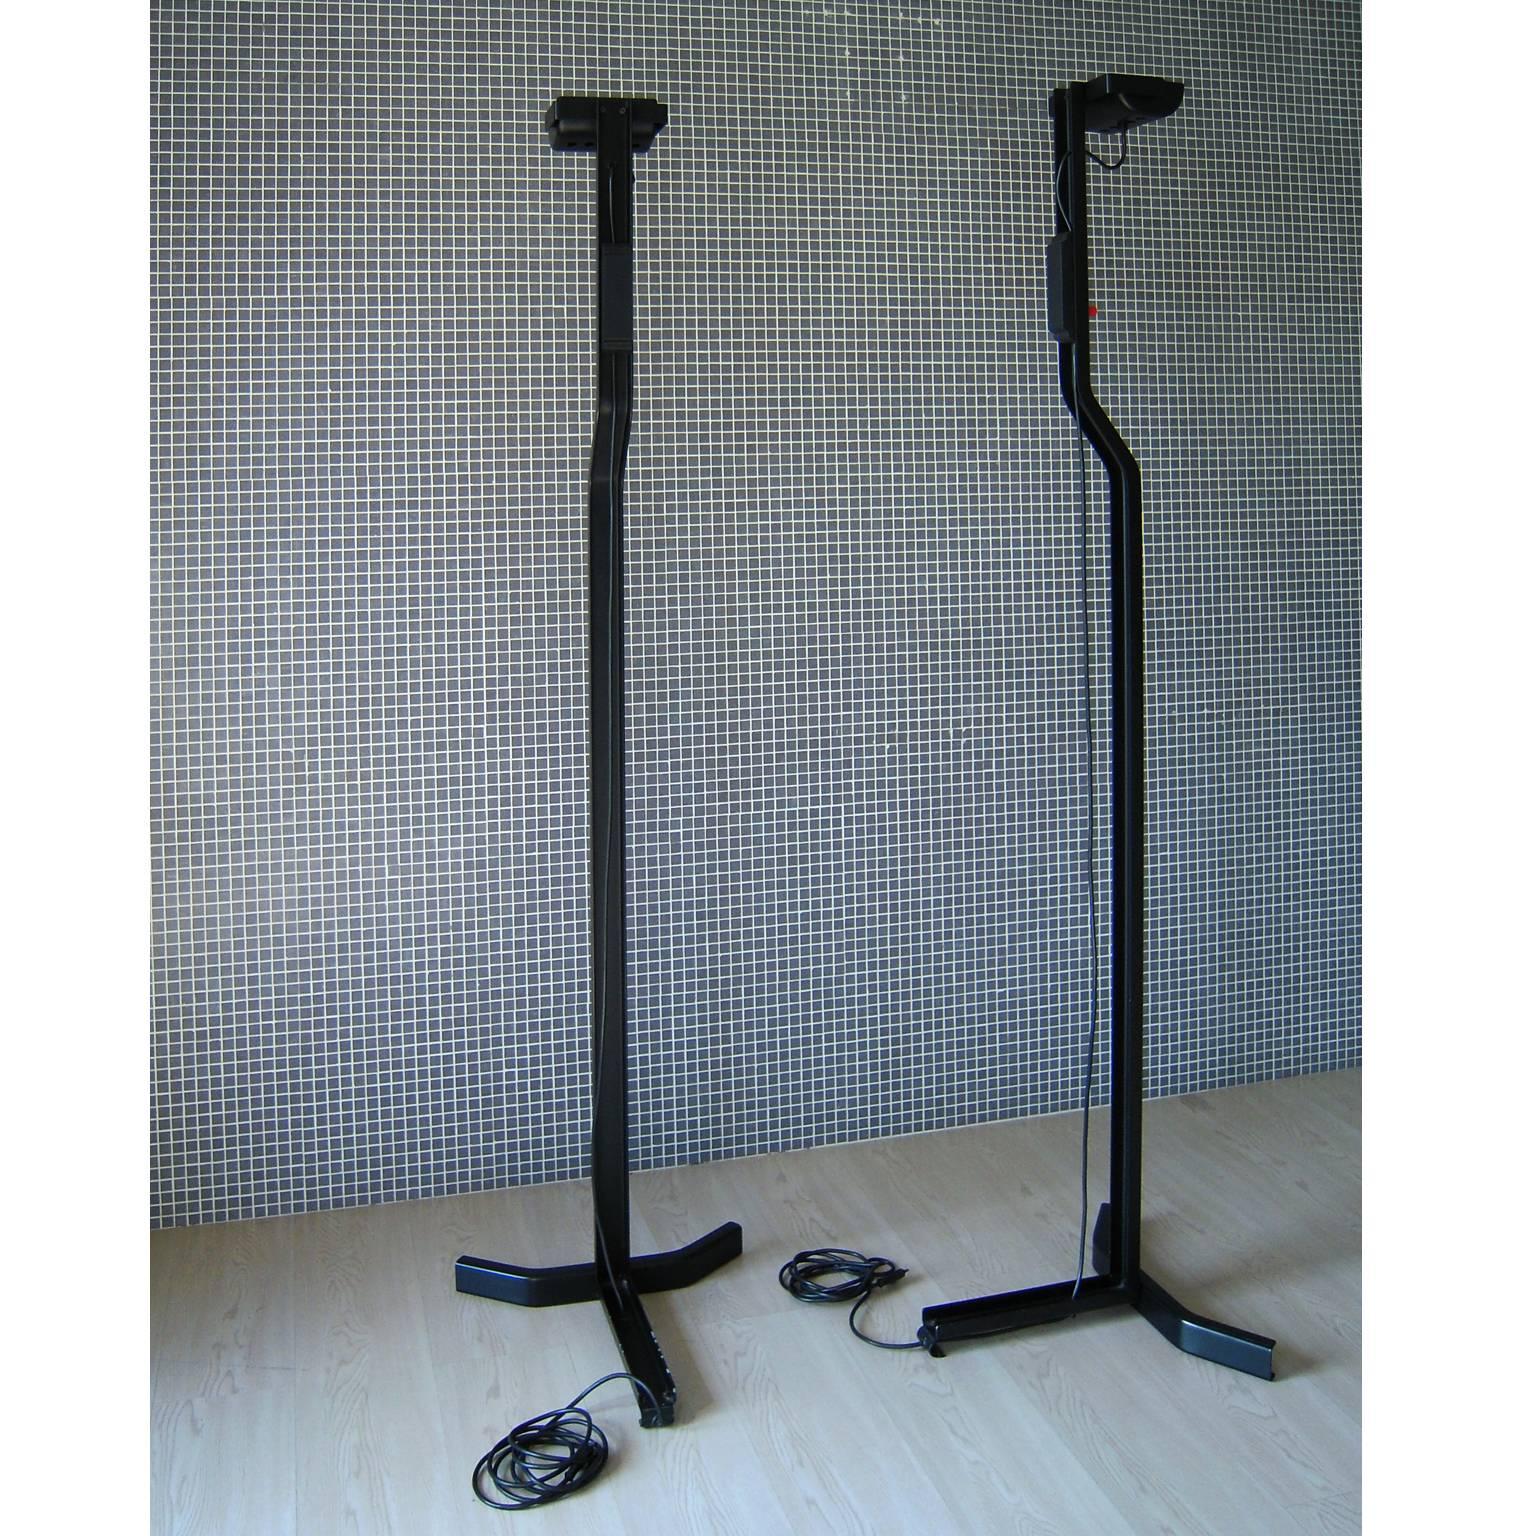 Floor lamp designed by Kazuhide Takahama and produced by Sirrah, in the 70'.
Matte black metal floor lamp with adjustable and ventilated reflector. 
The lamp is equipped with protection fuse and brightness controller with built-in switch.